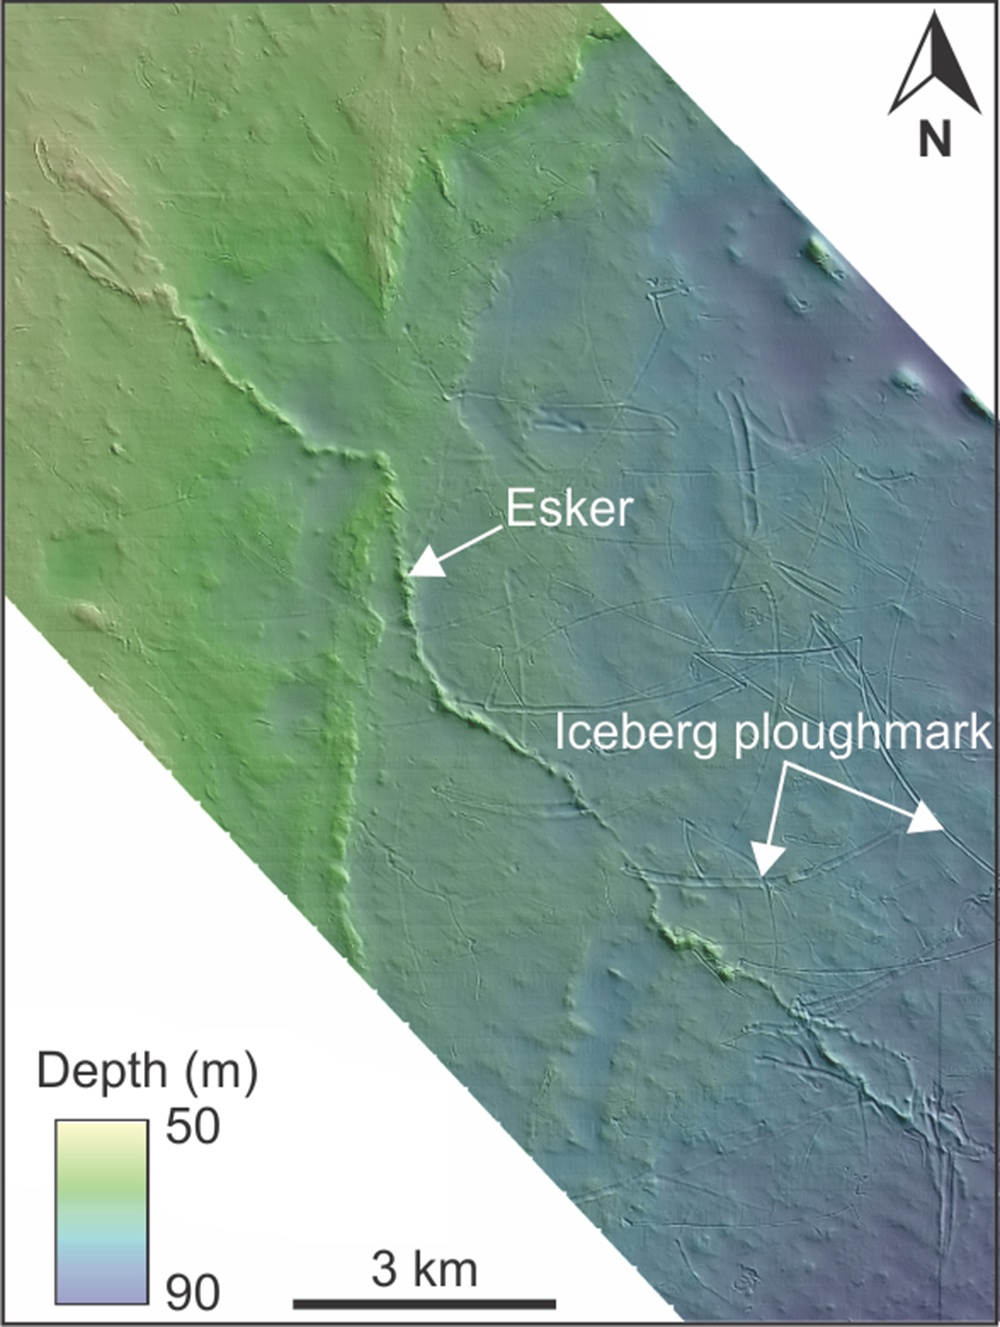 Figure 3: Shaded bathymetry map showing an esker and iceberg ploughmarks on Spitsbergenbanken. The esker is 17 kilometers long and up to eight meters high. 